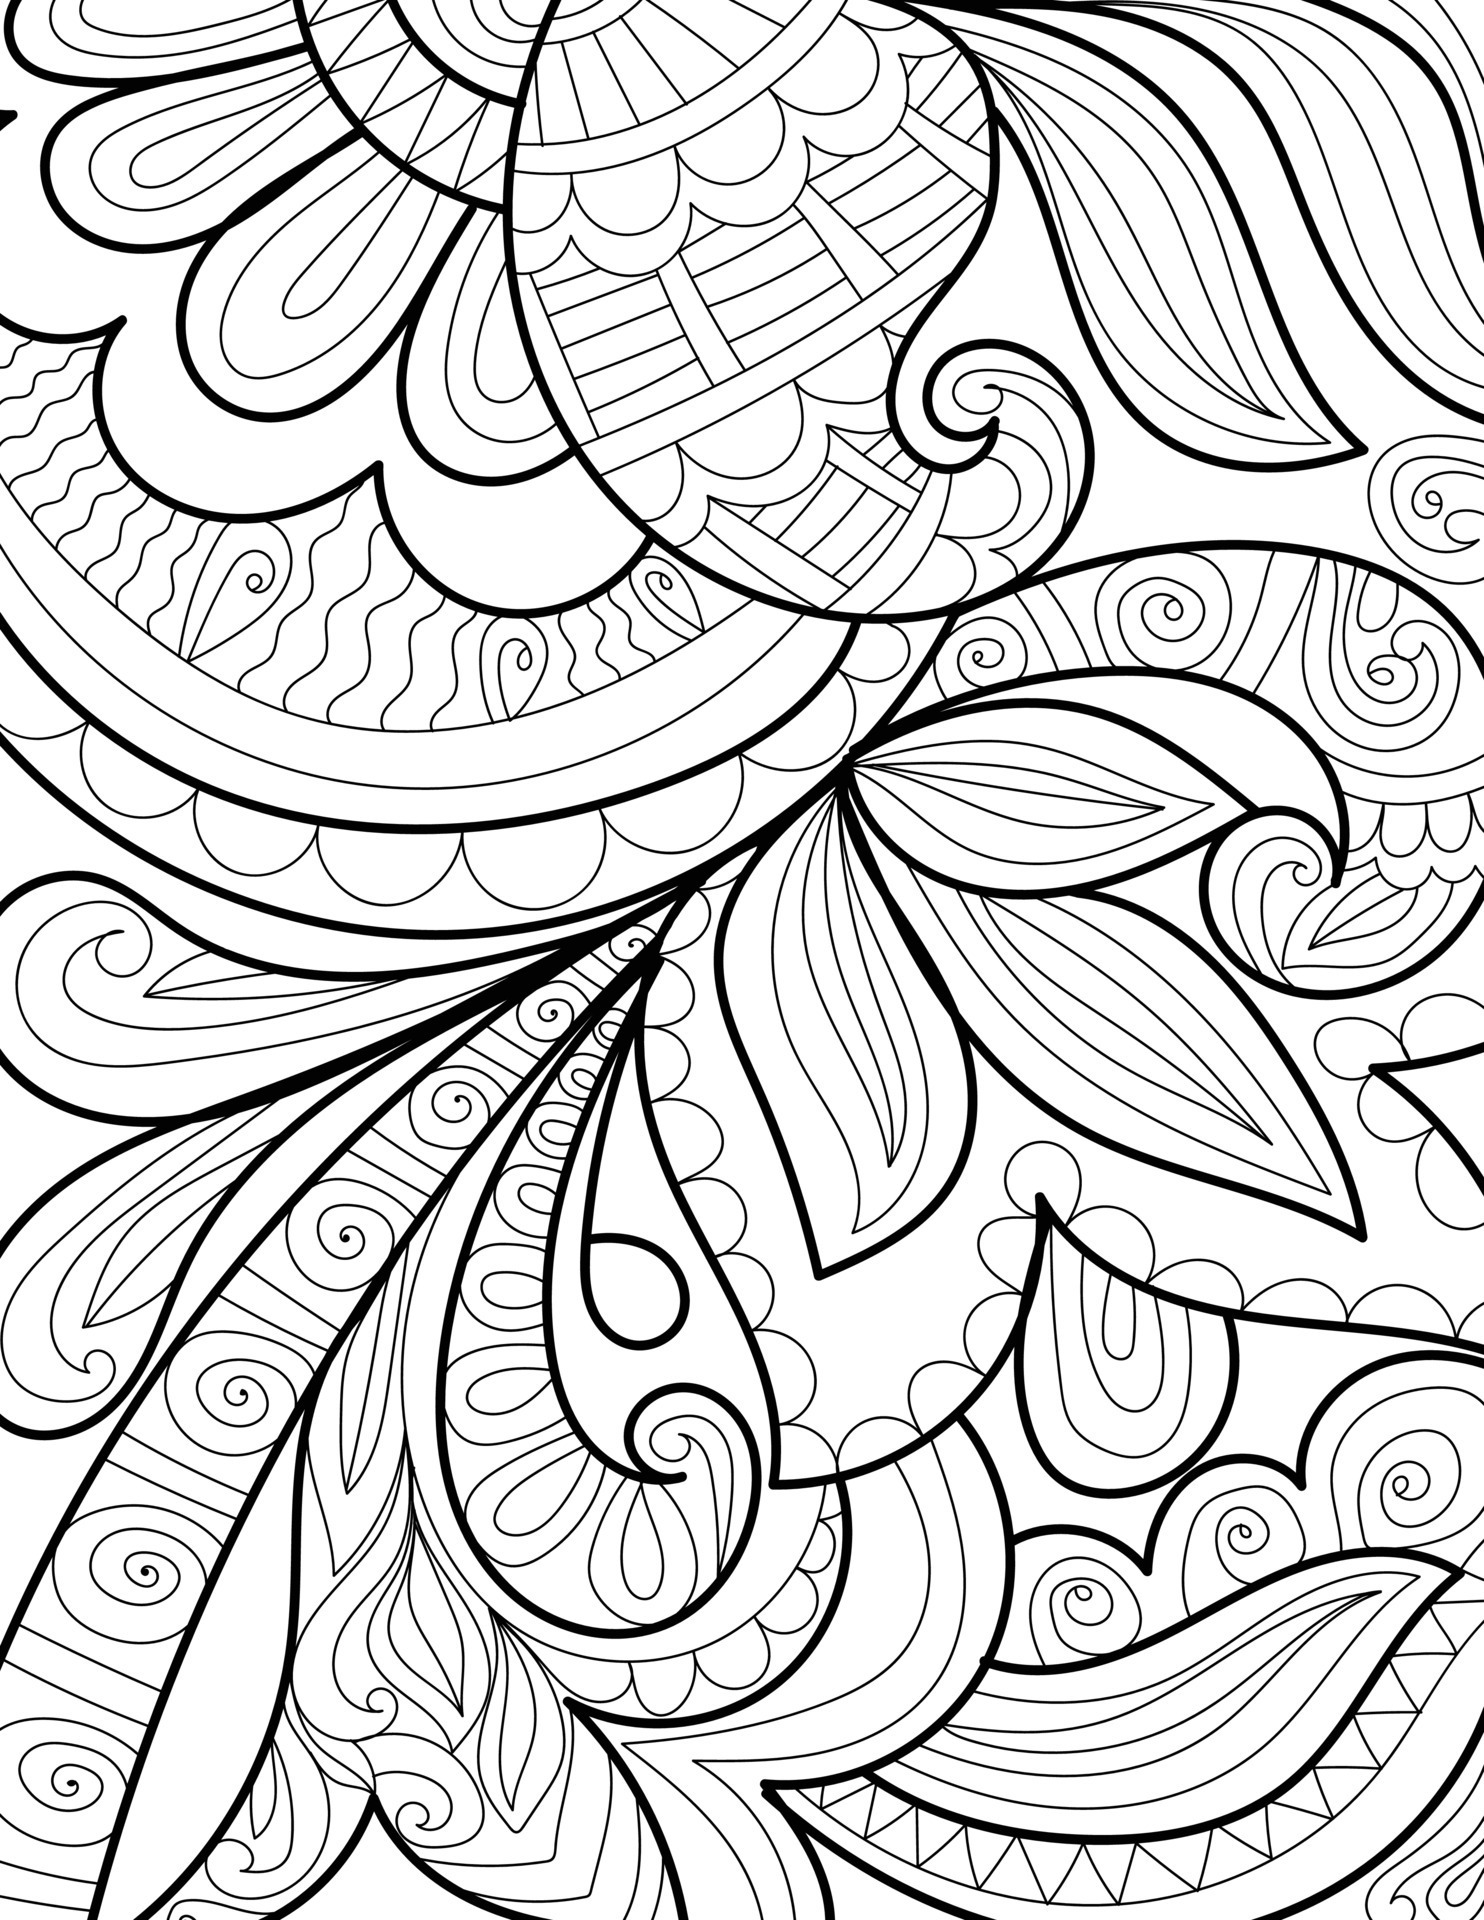 Decorative floral mehndi design style coloring book page illustration ...